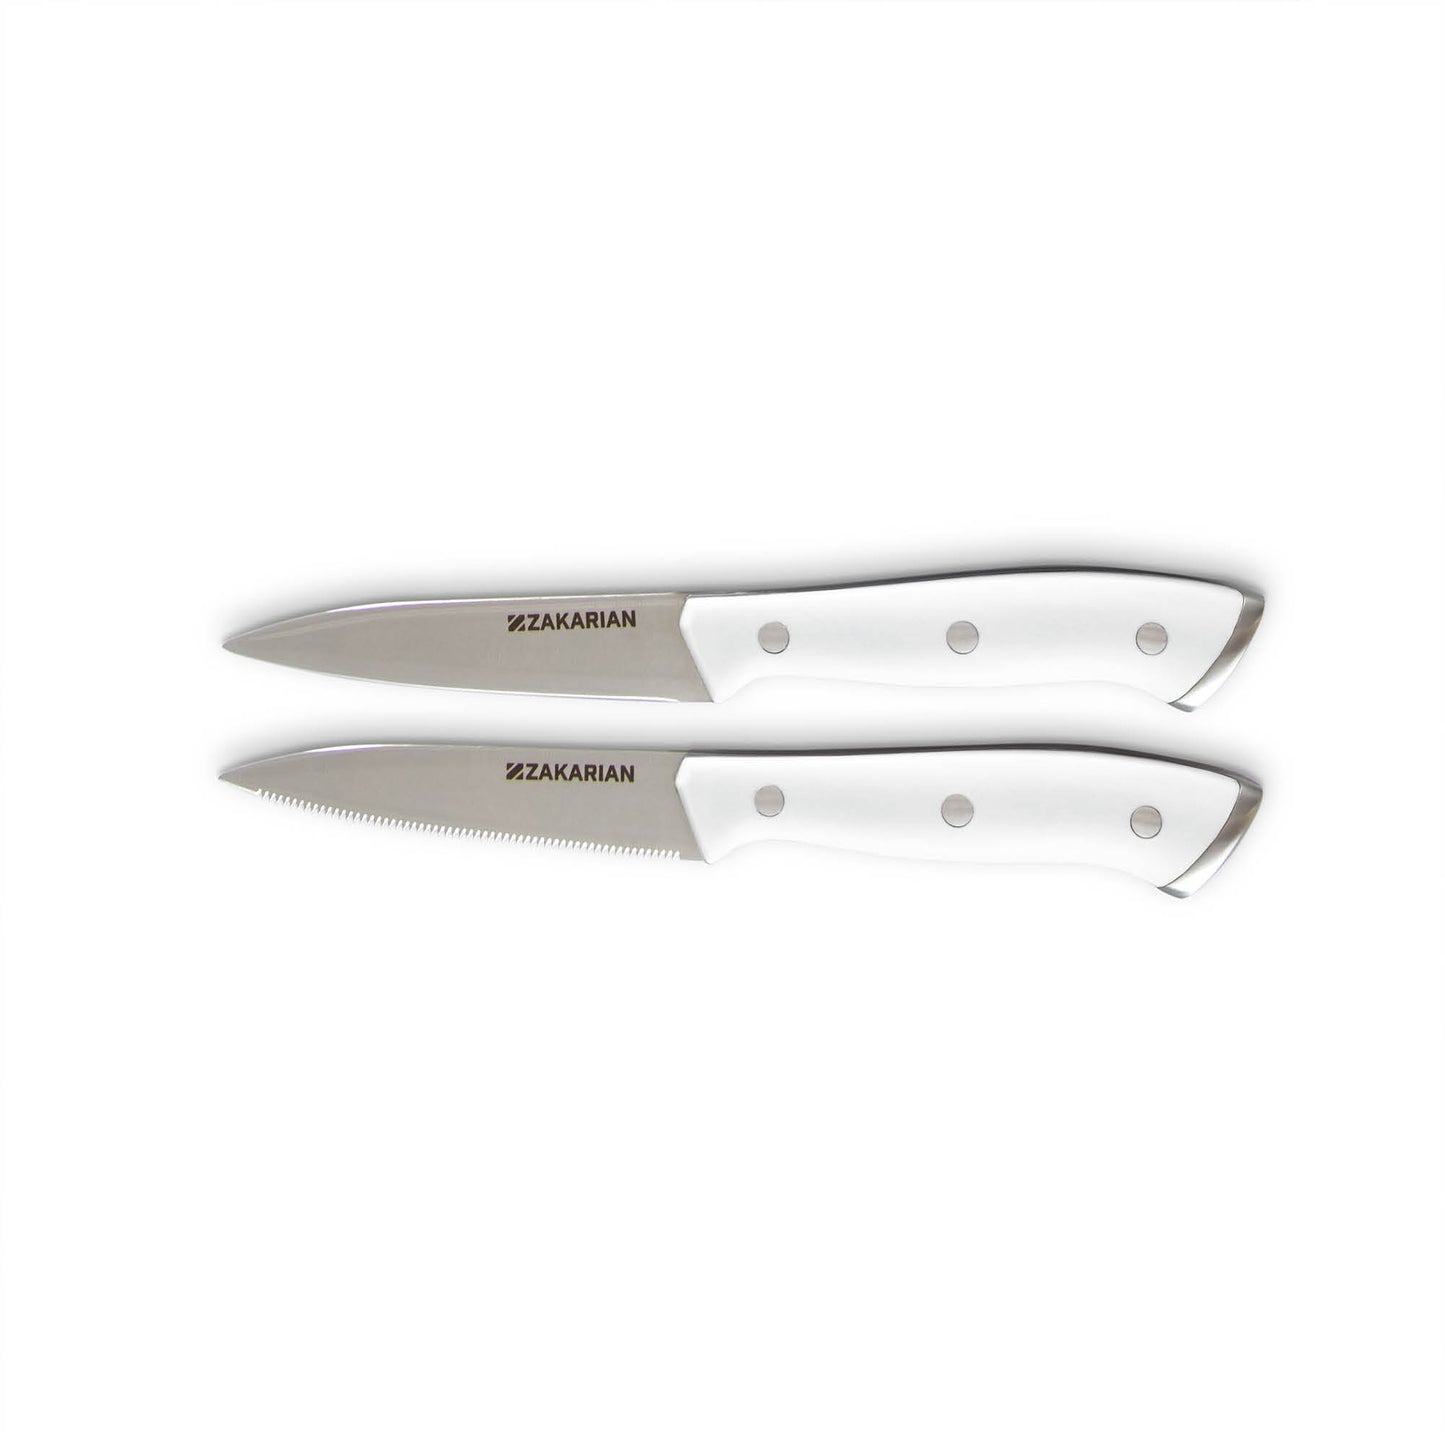 2 Piece Paring Knife Set cookware Zakarian by Dash White  